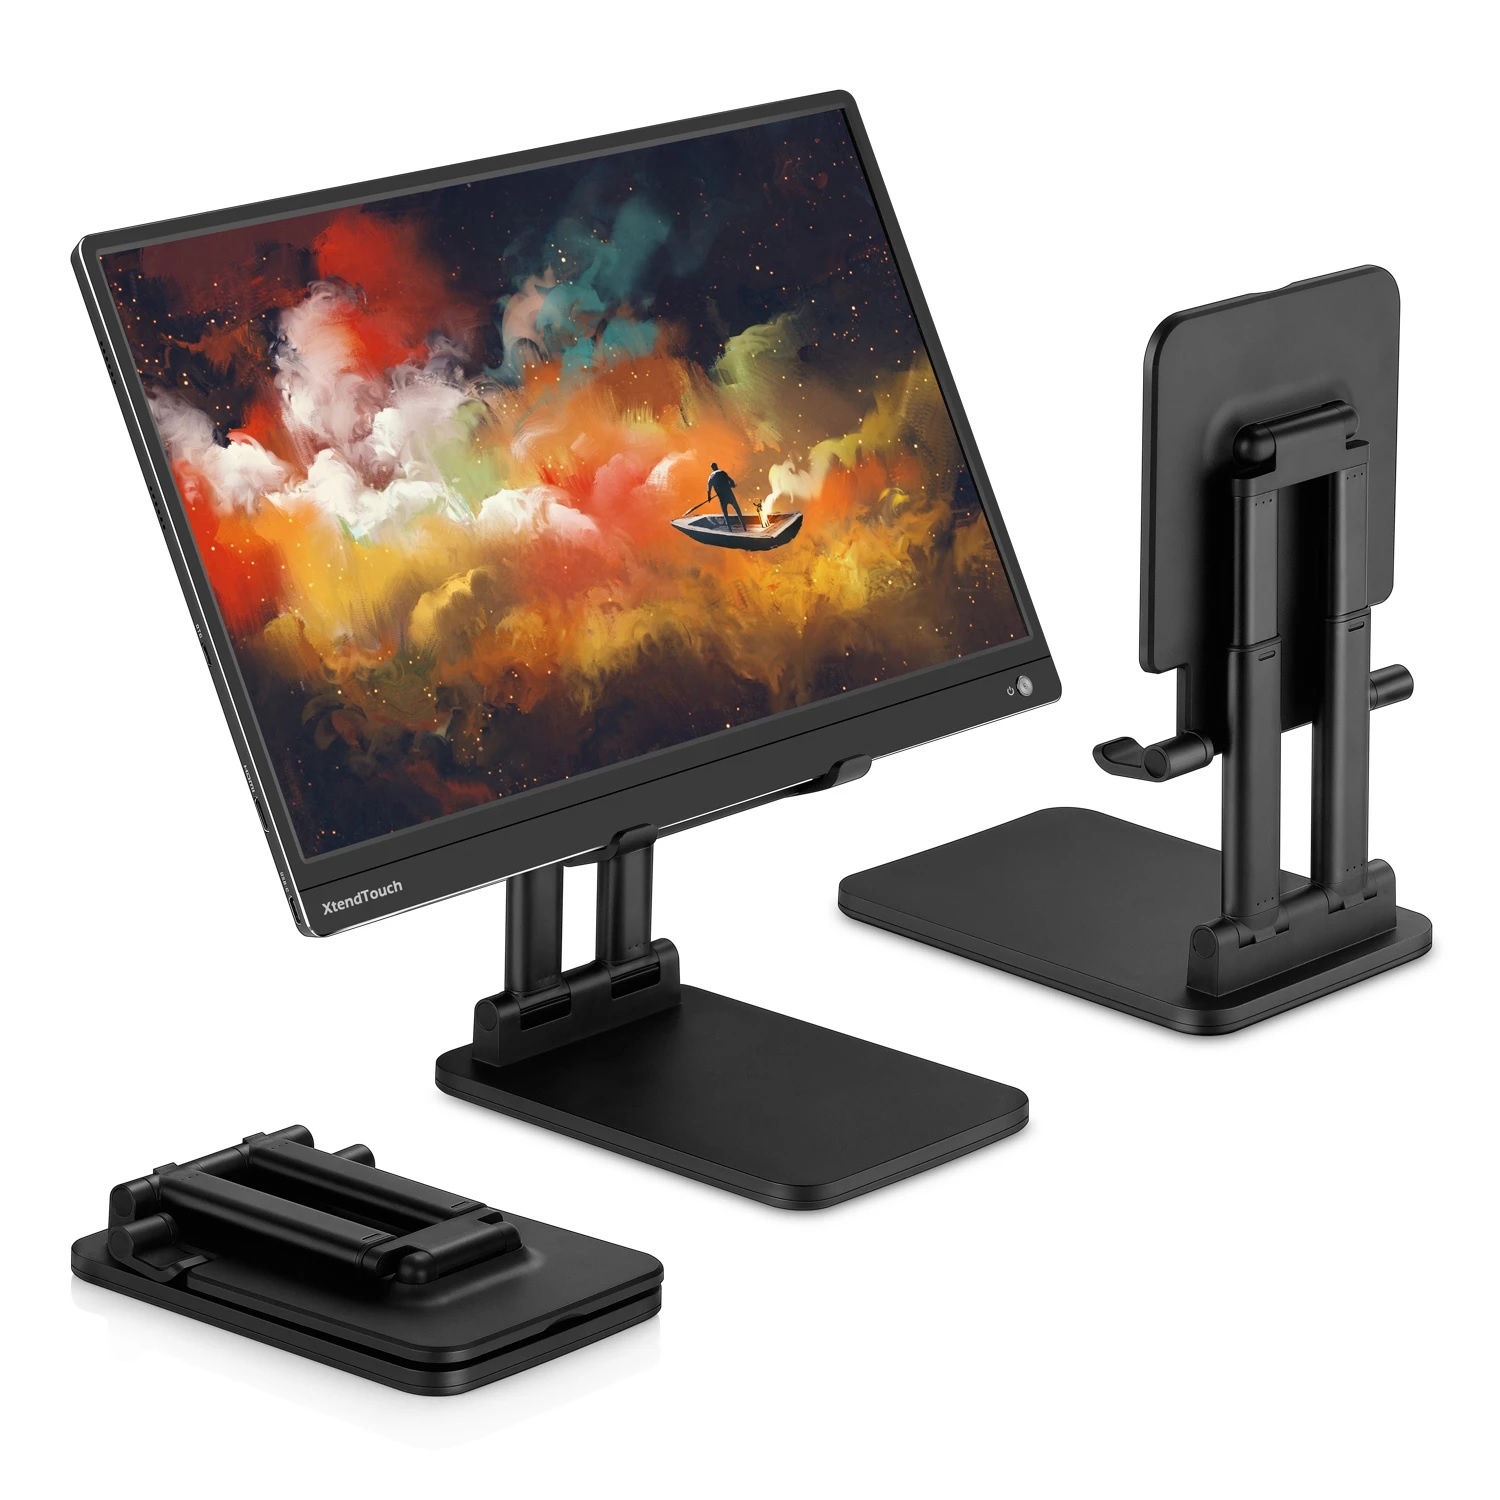 SSS-T6 Solid Sturdy Stand Monitor Stand  PEPPER JOBS EU - Official  authorized EU Distributor of PEPPER JOBS products Digital Signage Kiosk  players X28-i and X99-i